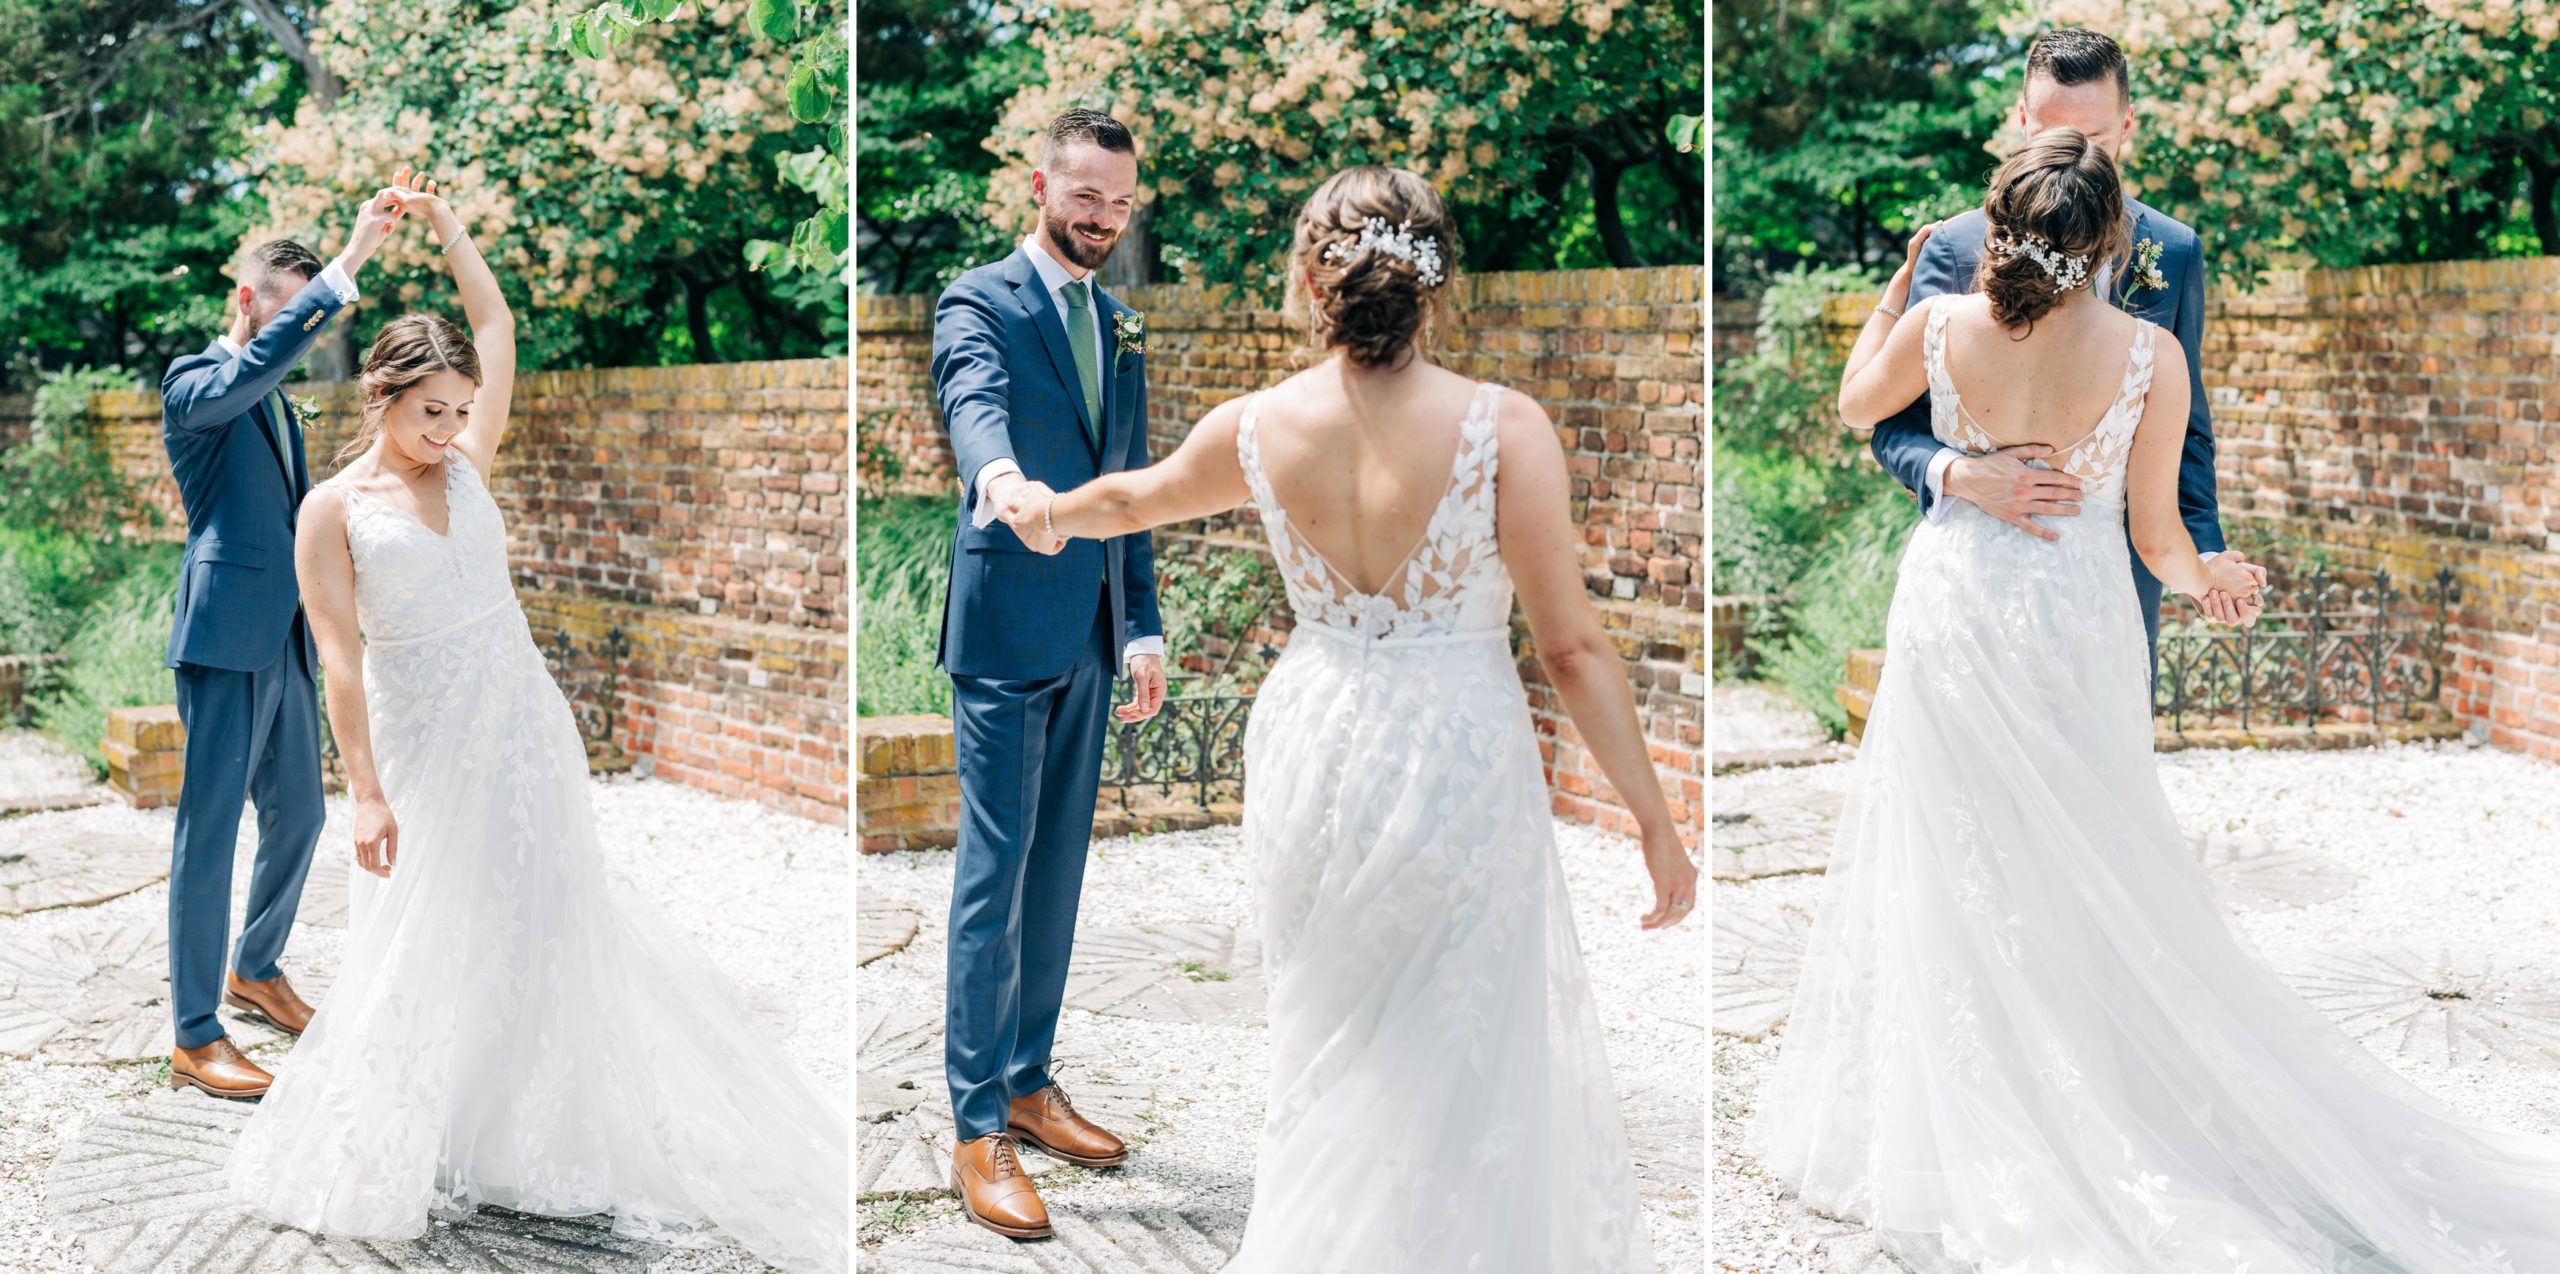 First look at at Hermitage Museum & Garden wedding